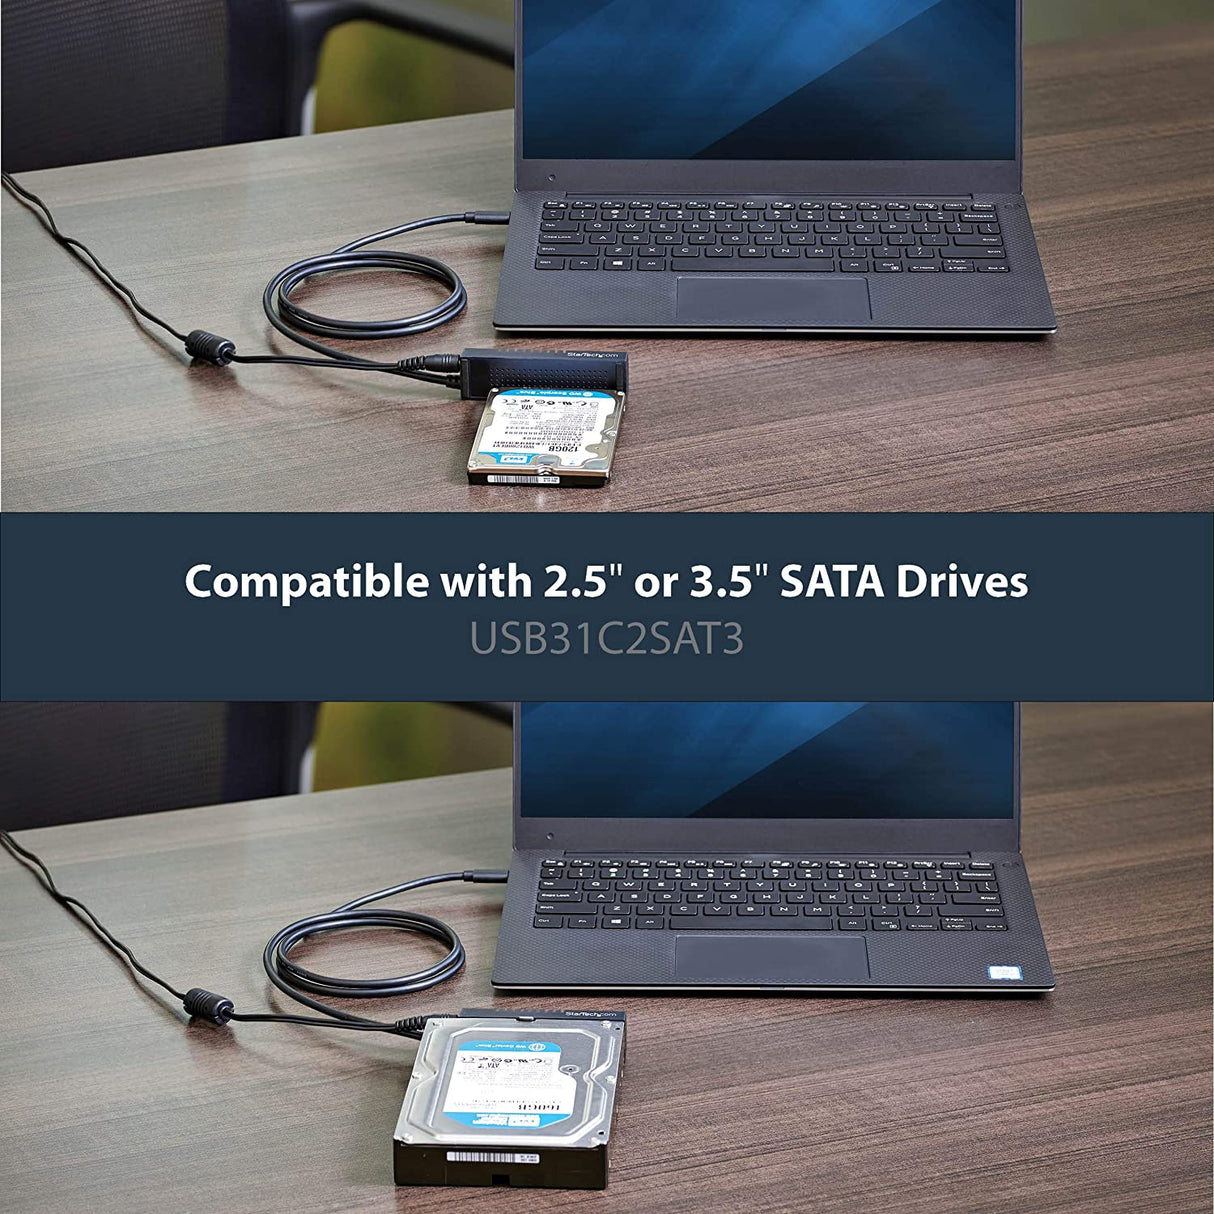 StarTech.com USB C to SATA Adapter Cable - for 2.5 / 3.5” SATA Drives - 10Gbps - USB 3.1 - SATA to USB Adapter - External Hard Drive Cable (USB31C2SAT3) 2.5"/3.5" Cable